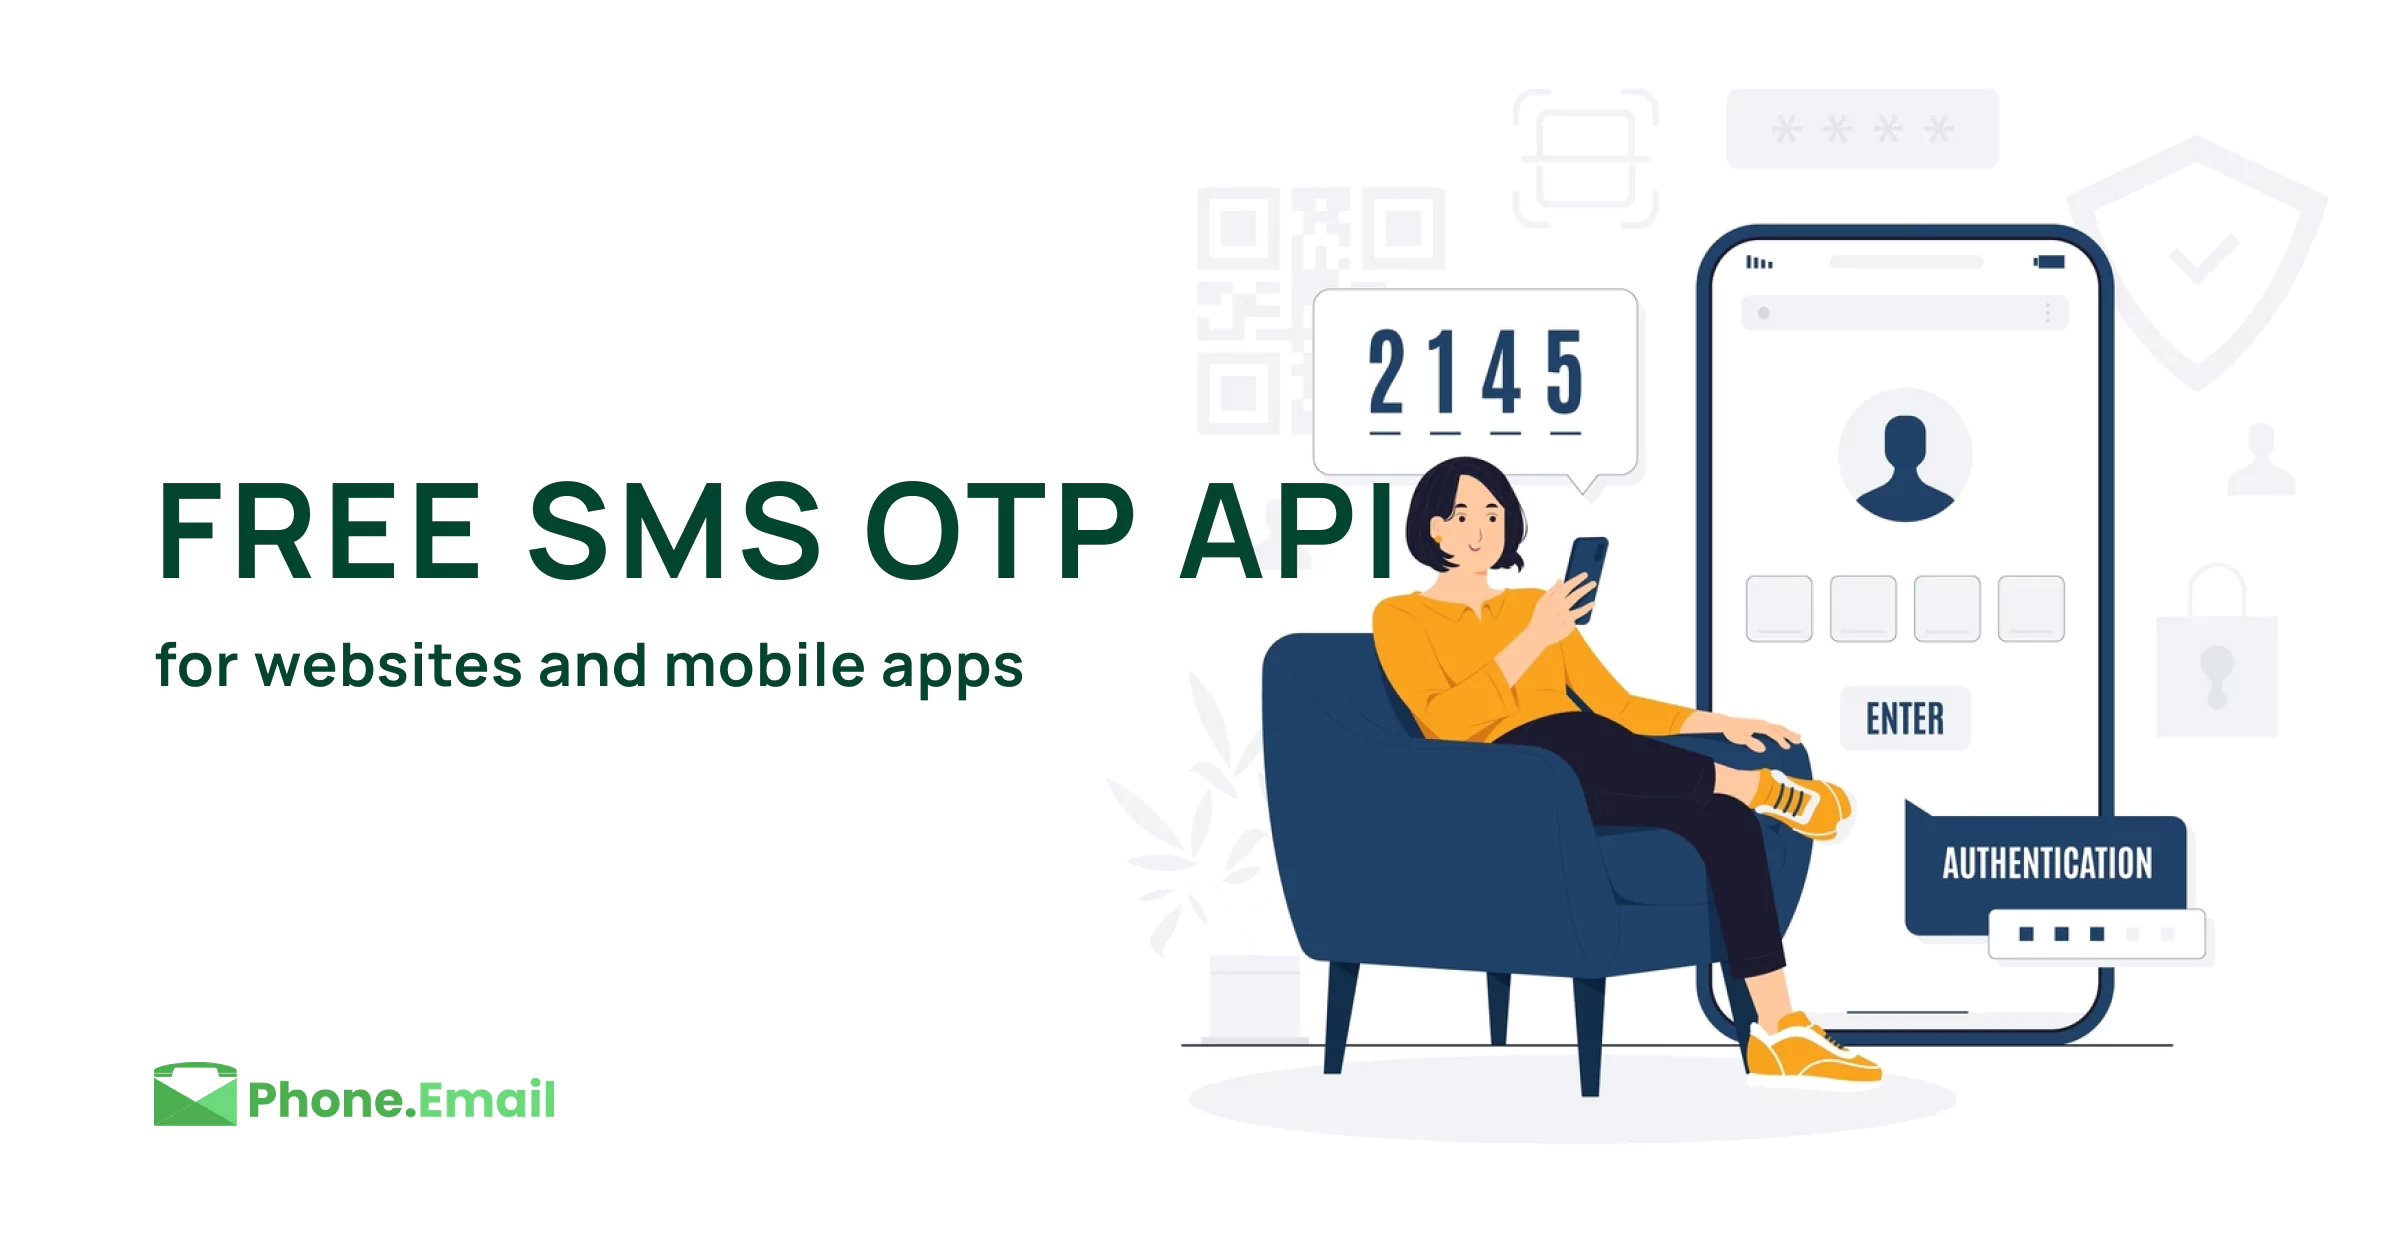 Phone Email API, SMS API, Send Email to Phone Number, Send Email to Mobile, Send OTP, Send SMS, Send Bulk SMS, Promotional SMS, Transactional SMS